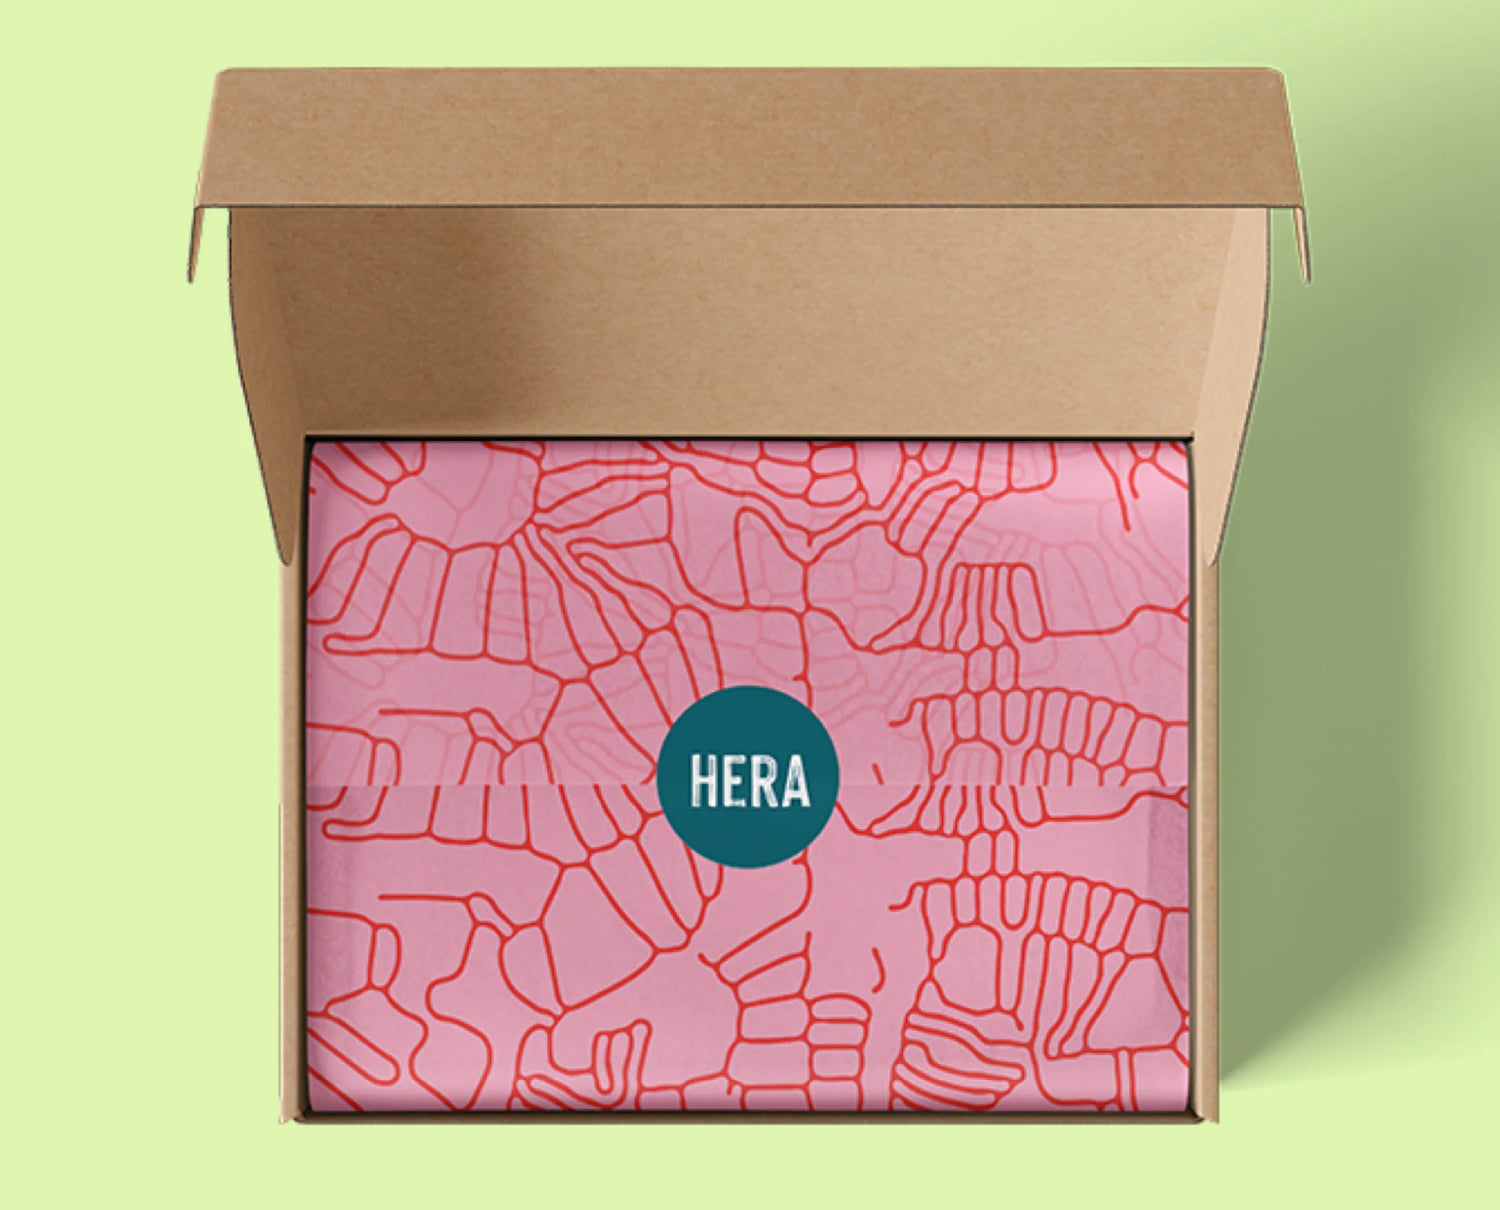 Tissue packaging example from brand Arka